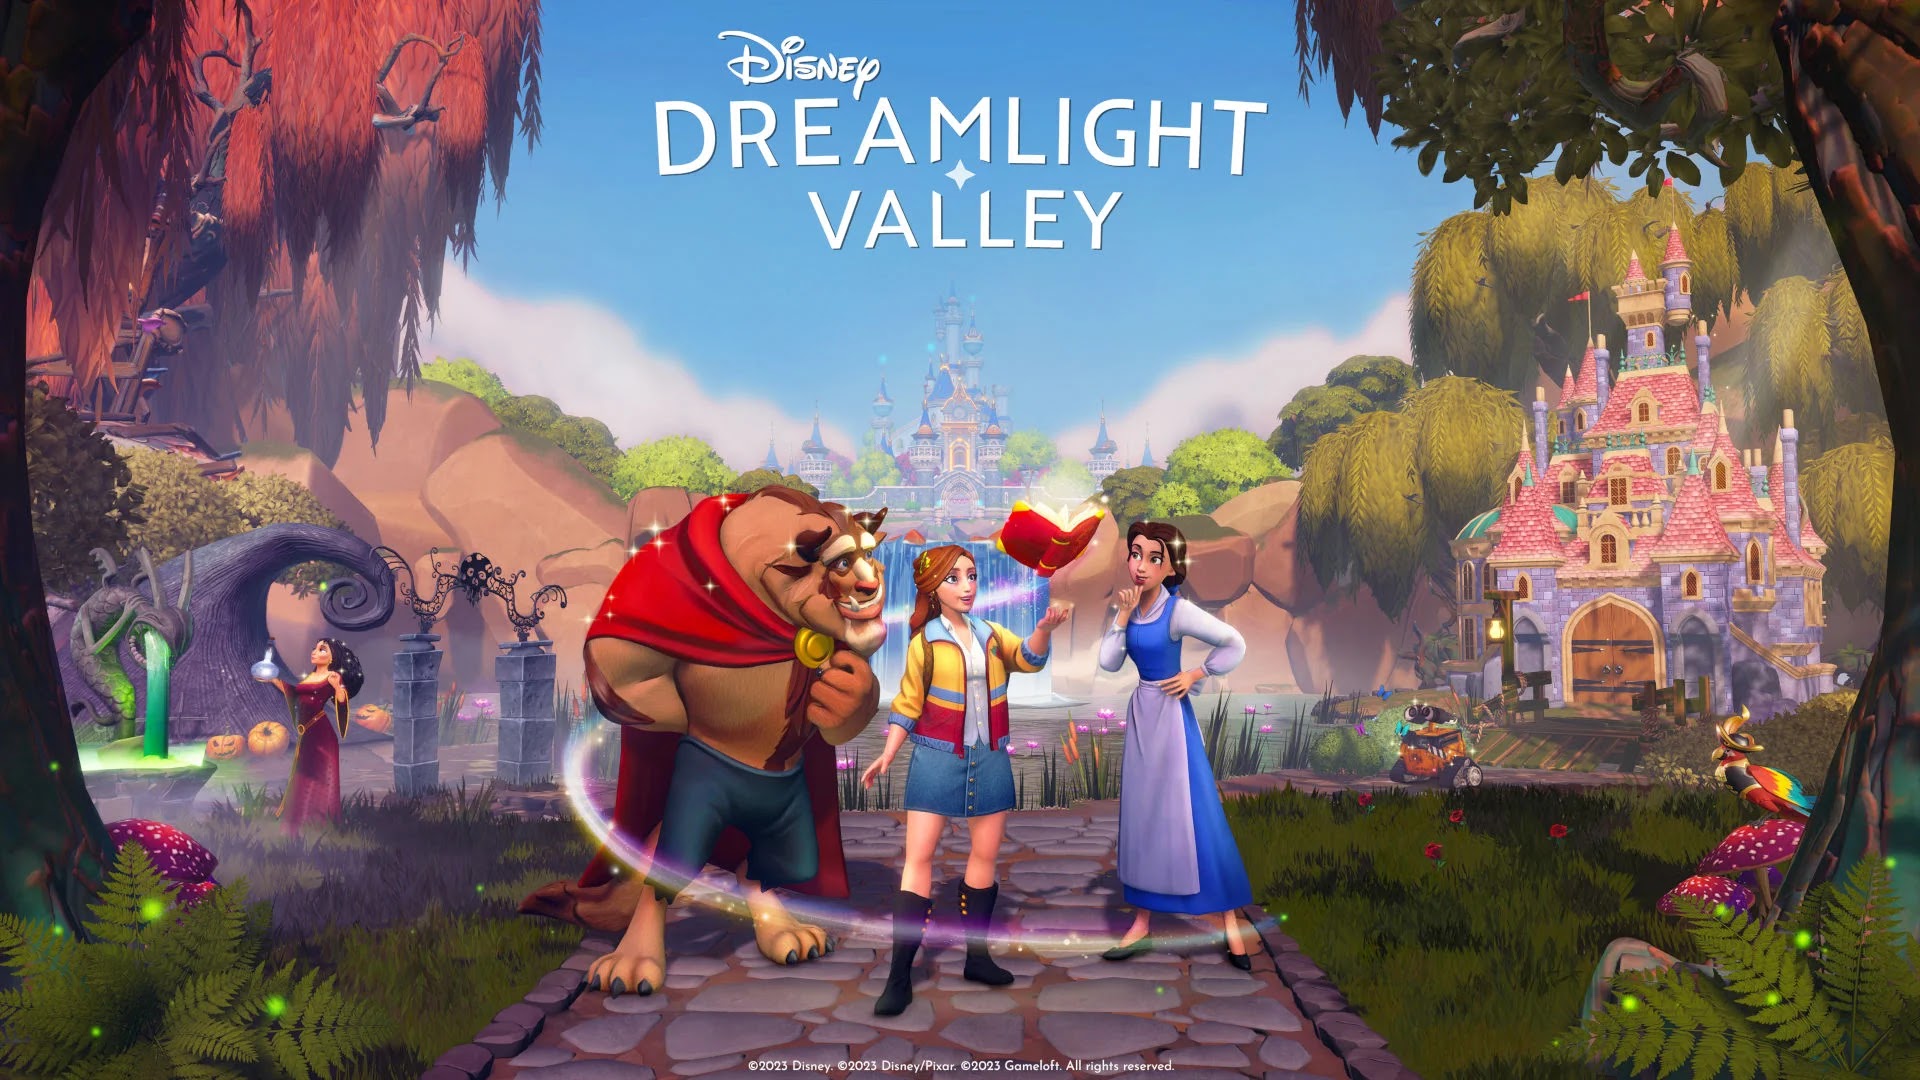 Deeply Musical Fish Disney Dreamlight Valley: how to complete the quest?